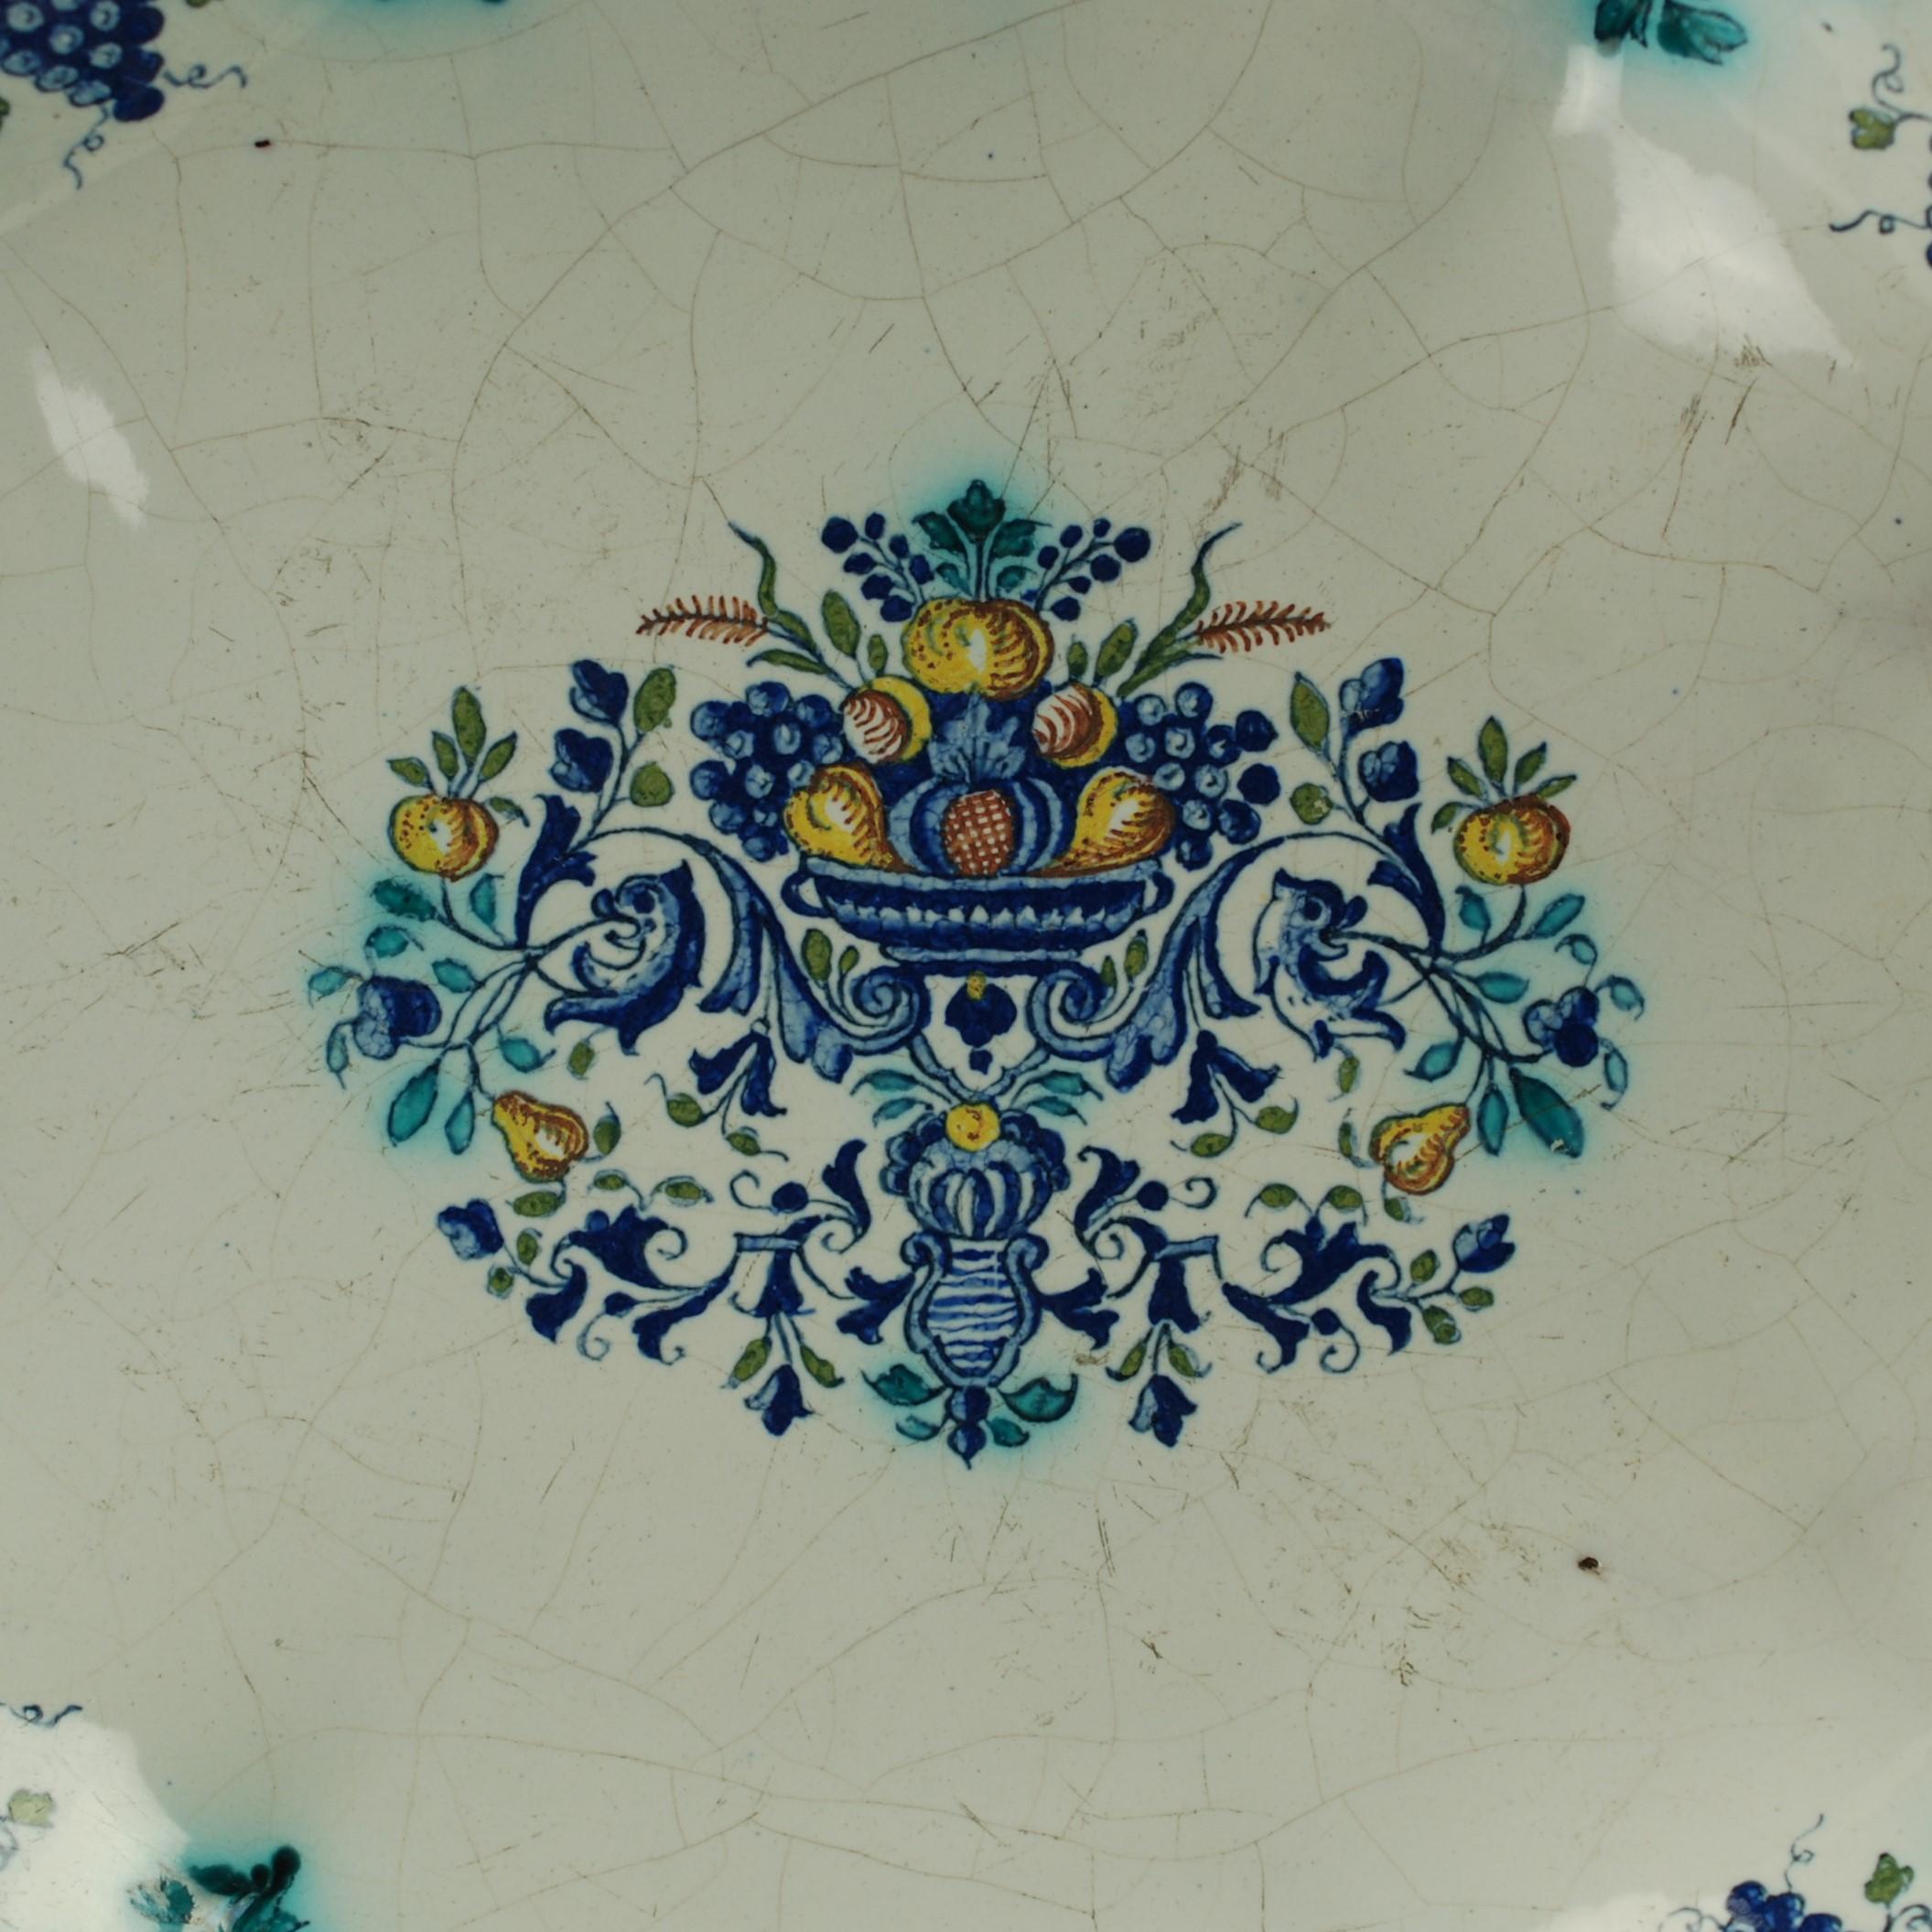 This early 18th century tin glazed earthenware platter was made by the Hannong ceramics factory in Strasbourg, France. Hannong was founded in 1721 by Charles-François Hannong and remained in the family until closing in 1780. Faience produced in the